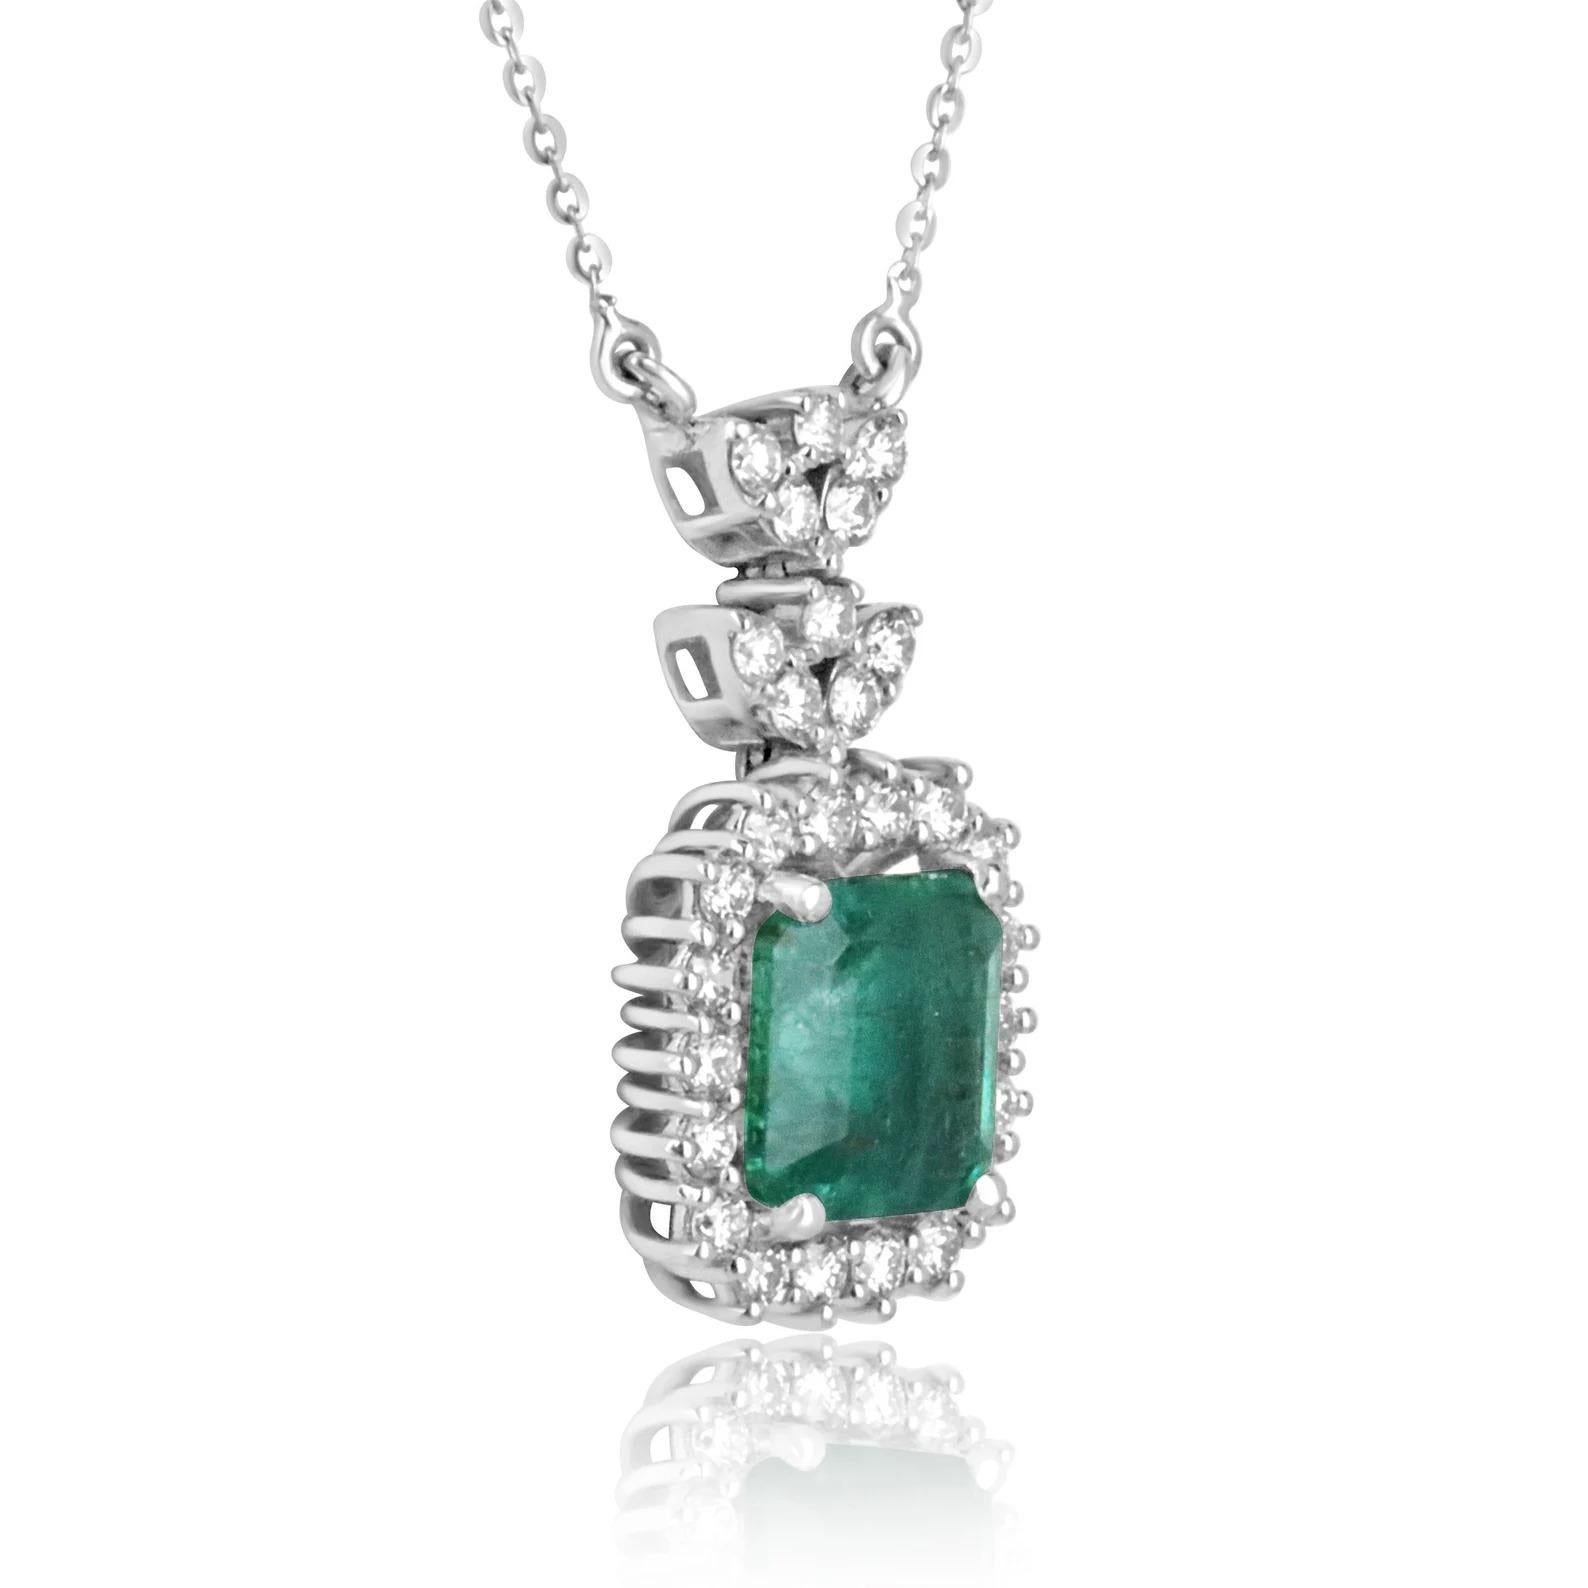 A special and intimate piece, this is a remarkable natural emerald and diamond necklace. The center stone features a ravishing and large 4.58-carat, natural asscher cut emerald with a deep medium dark green color and bluish-green hue. Jardin, carbon